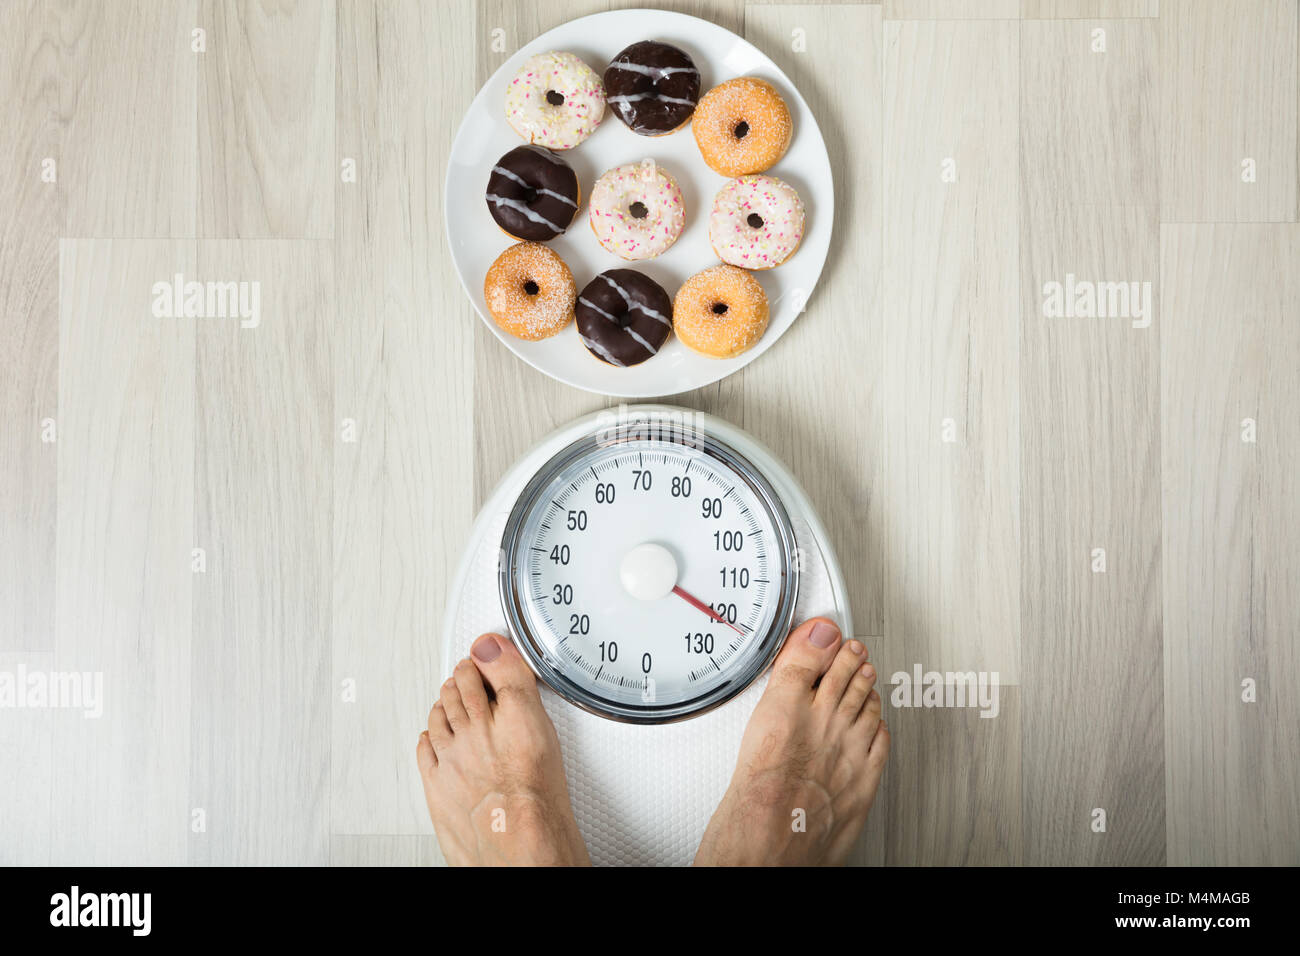 A Person's Feet On Weight Scale With Dish Of Donuts On Floor Stock Photo